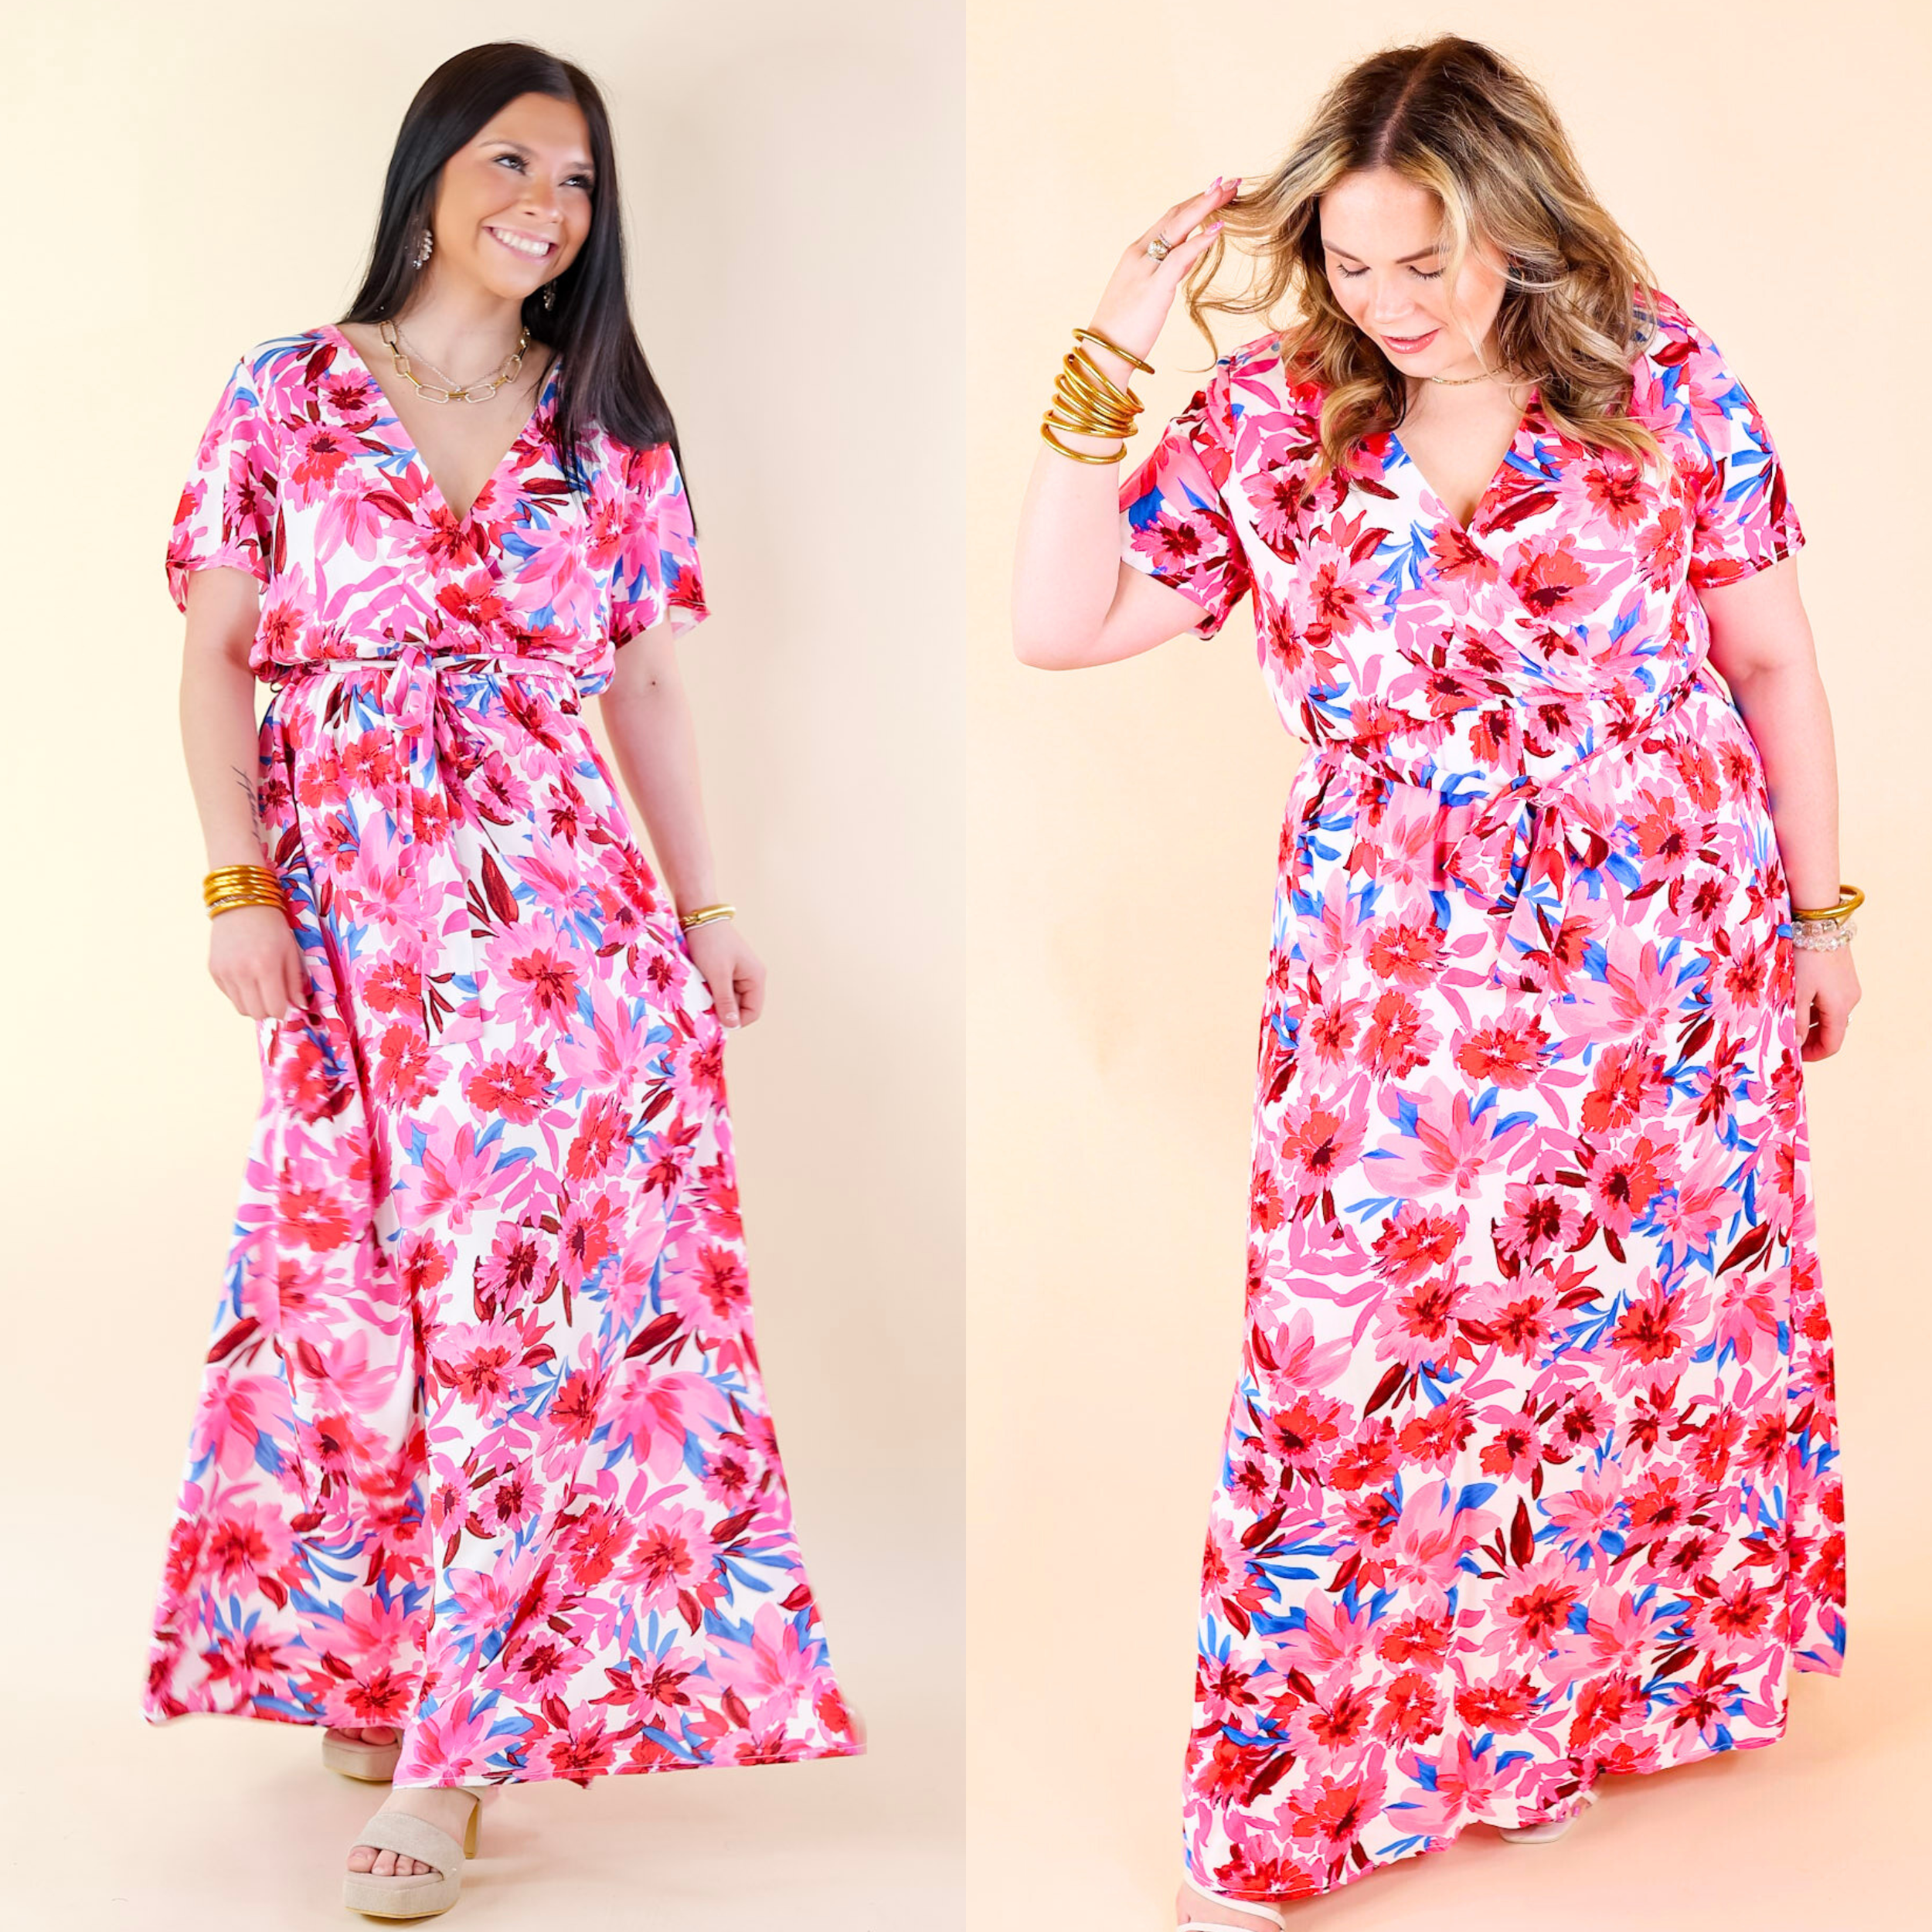 Delightful Dip Floral Maxi Dress with Waist Tie in Pink Mix